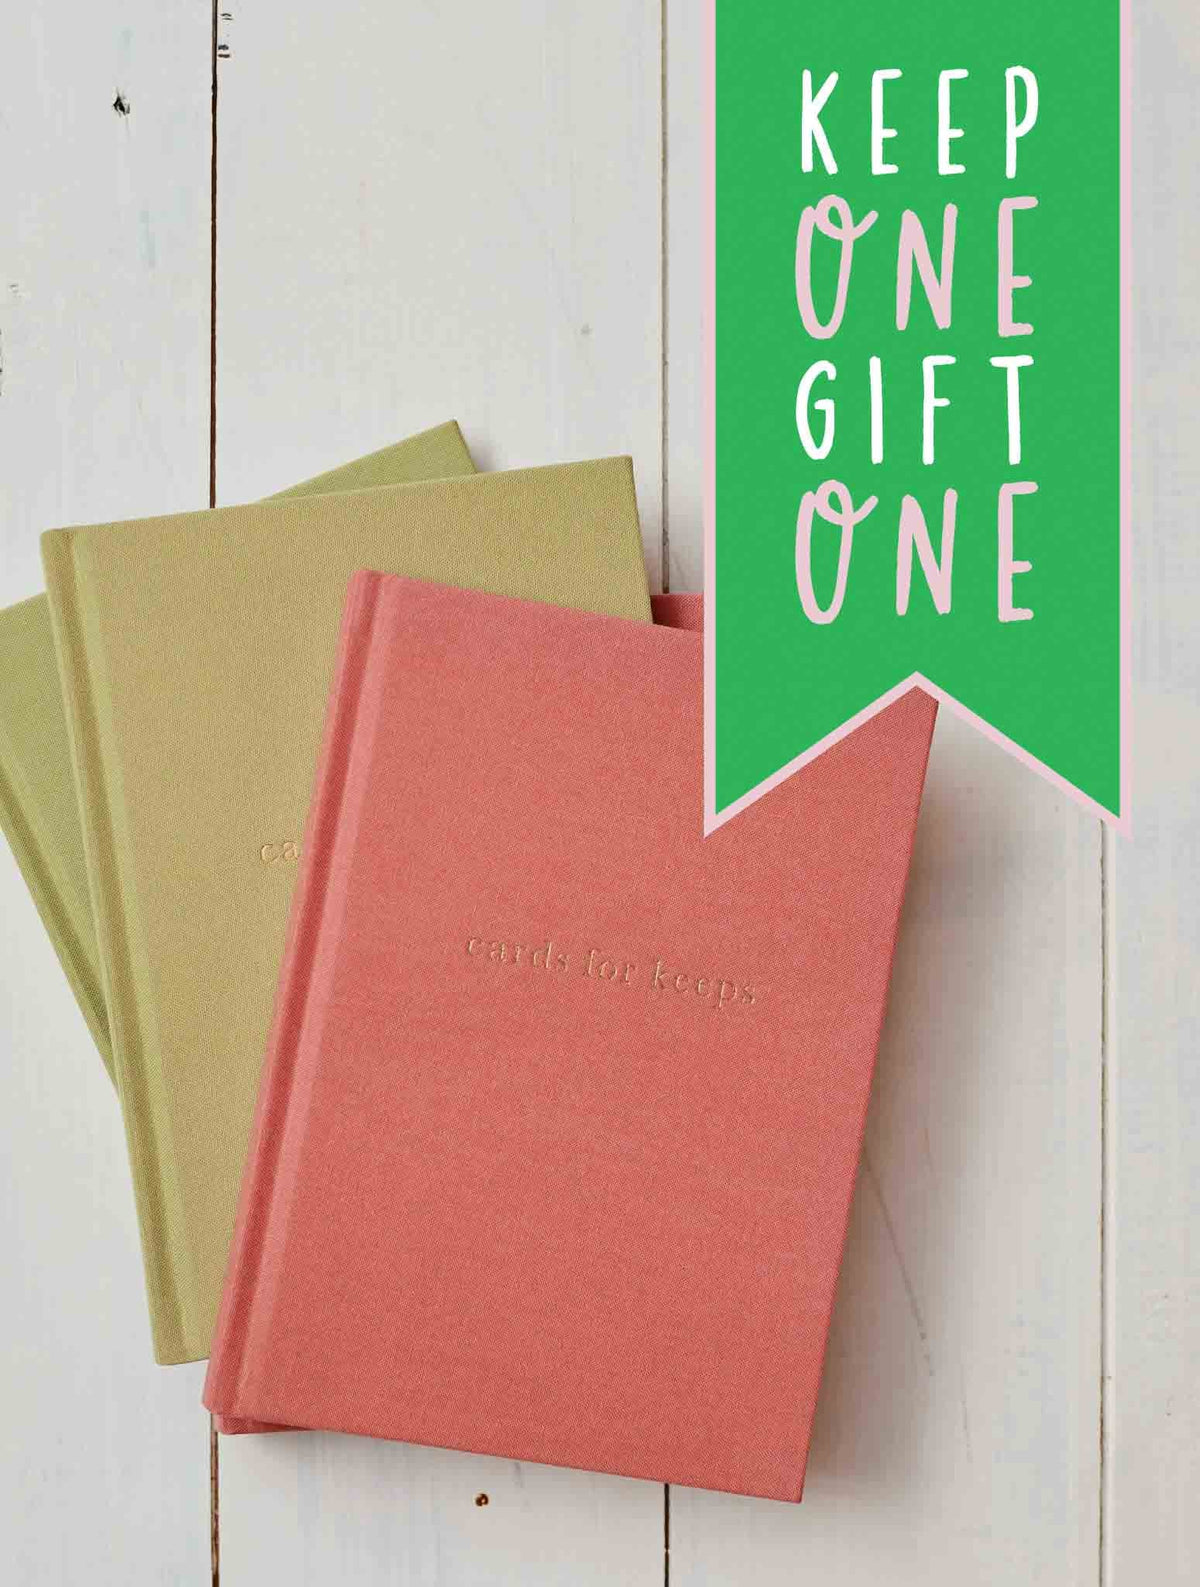 Cards For Keeps. Keep One Gift One Bundle